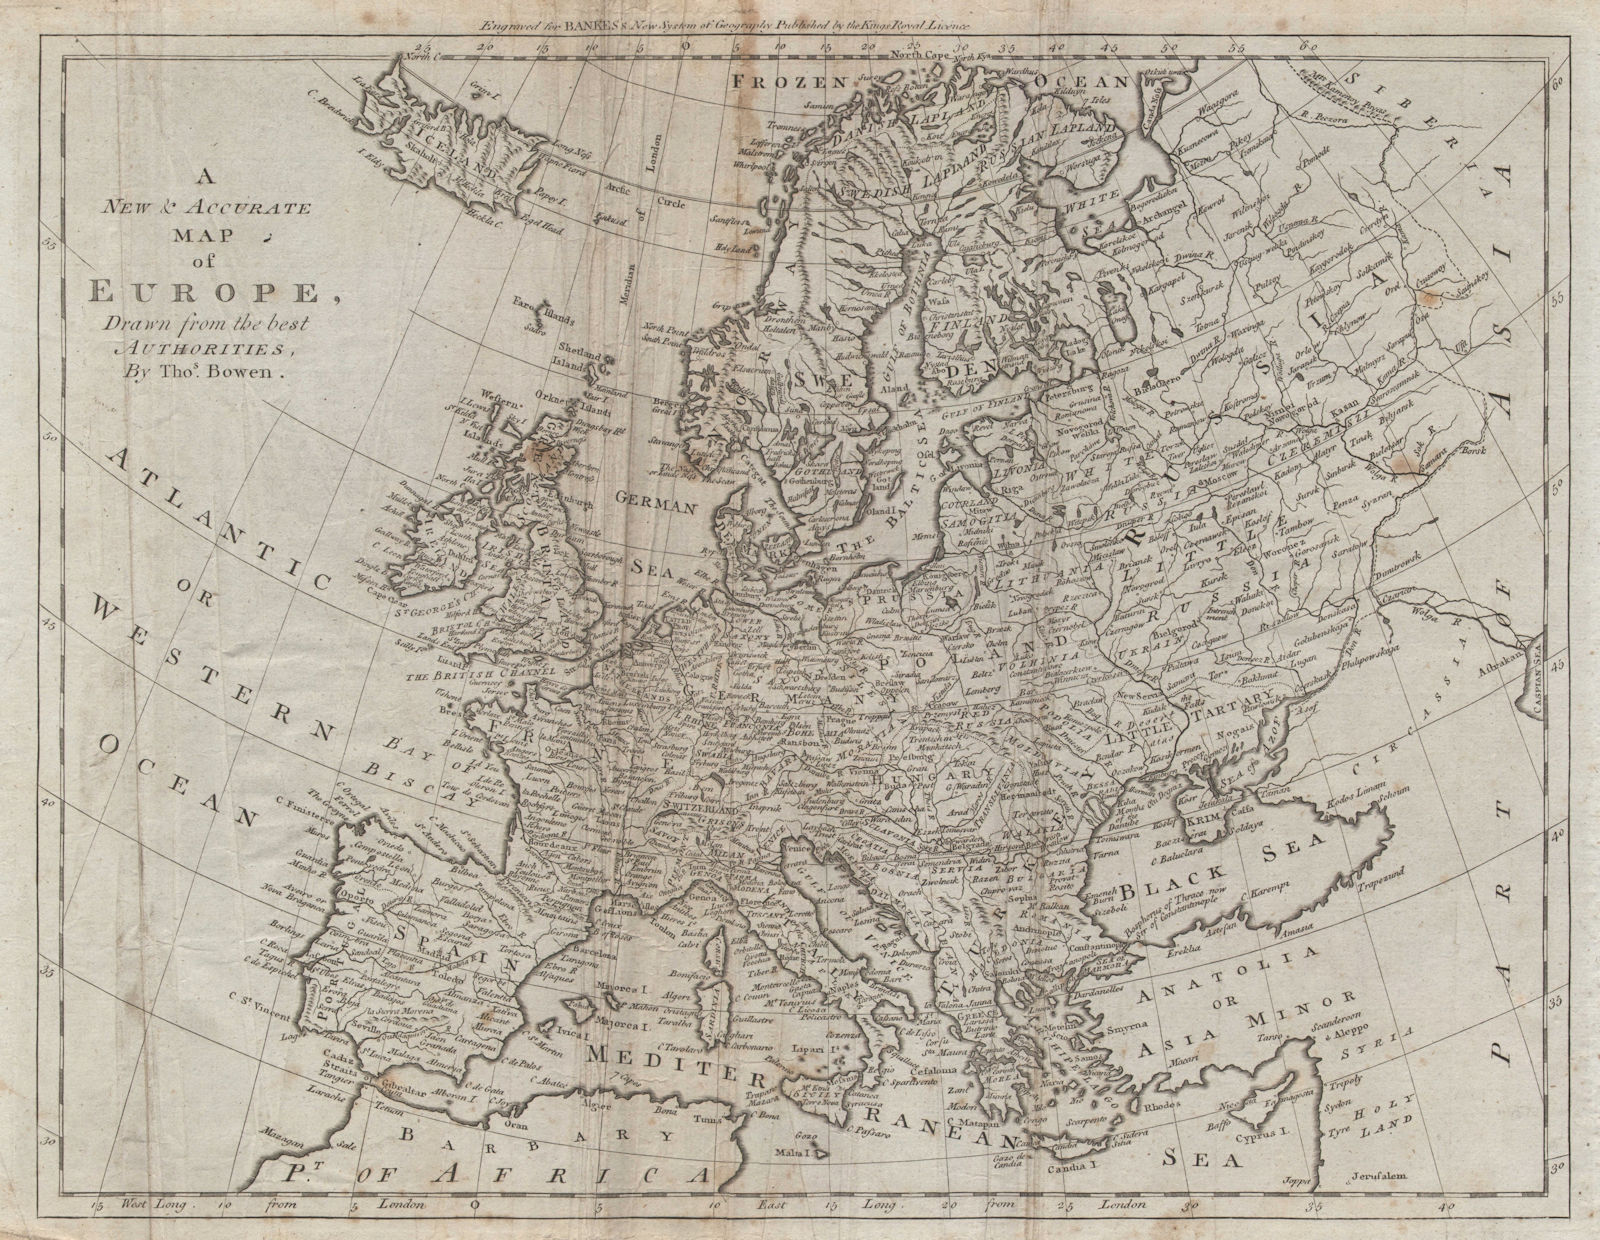 Associate Product A new & accurate map of Europe drawn from the best authorities. BOWEN 1789